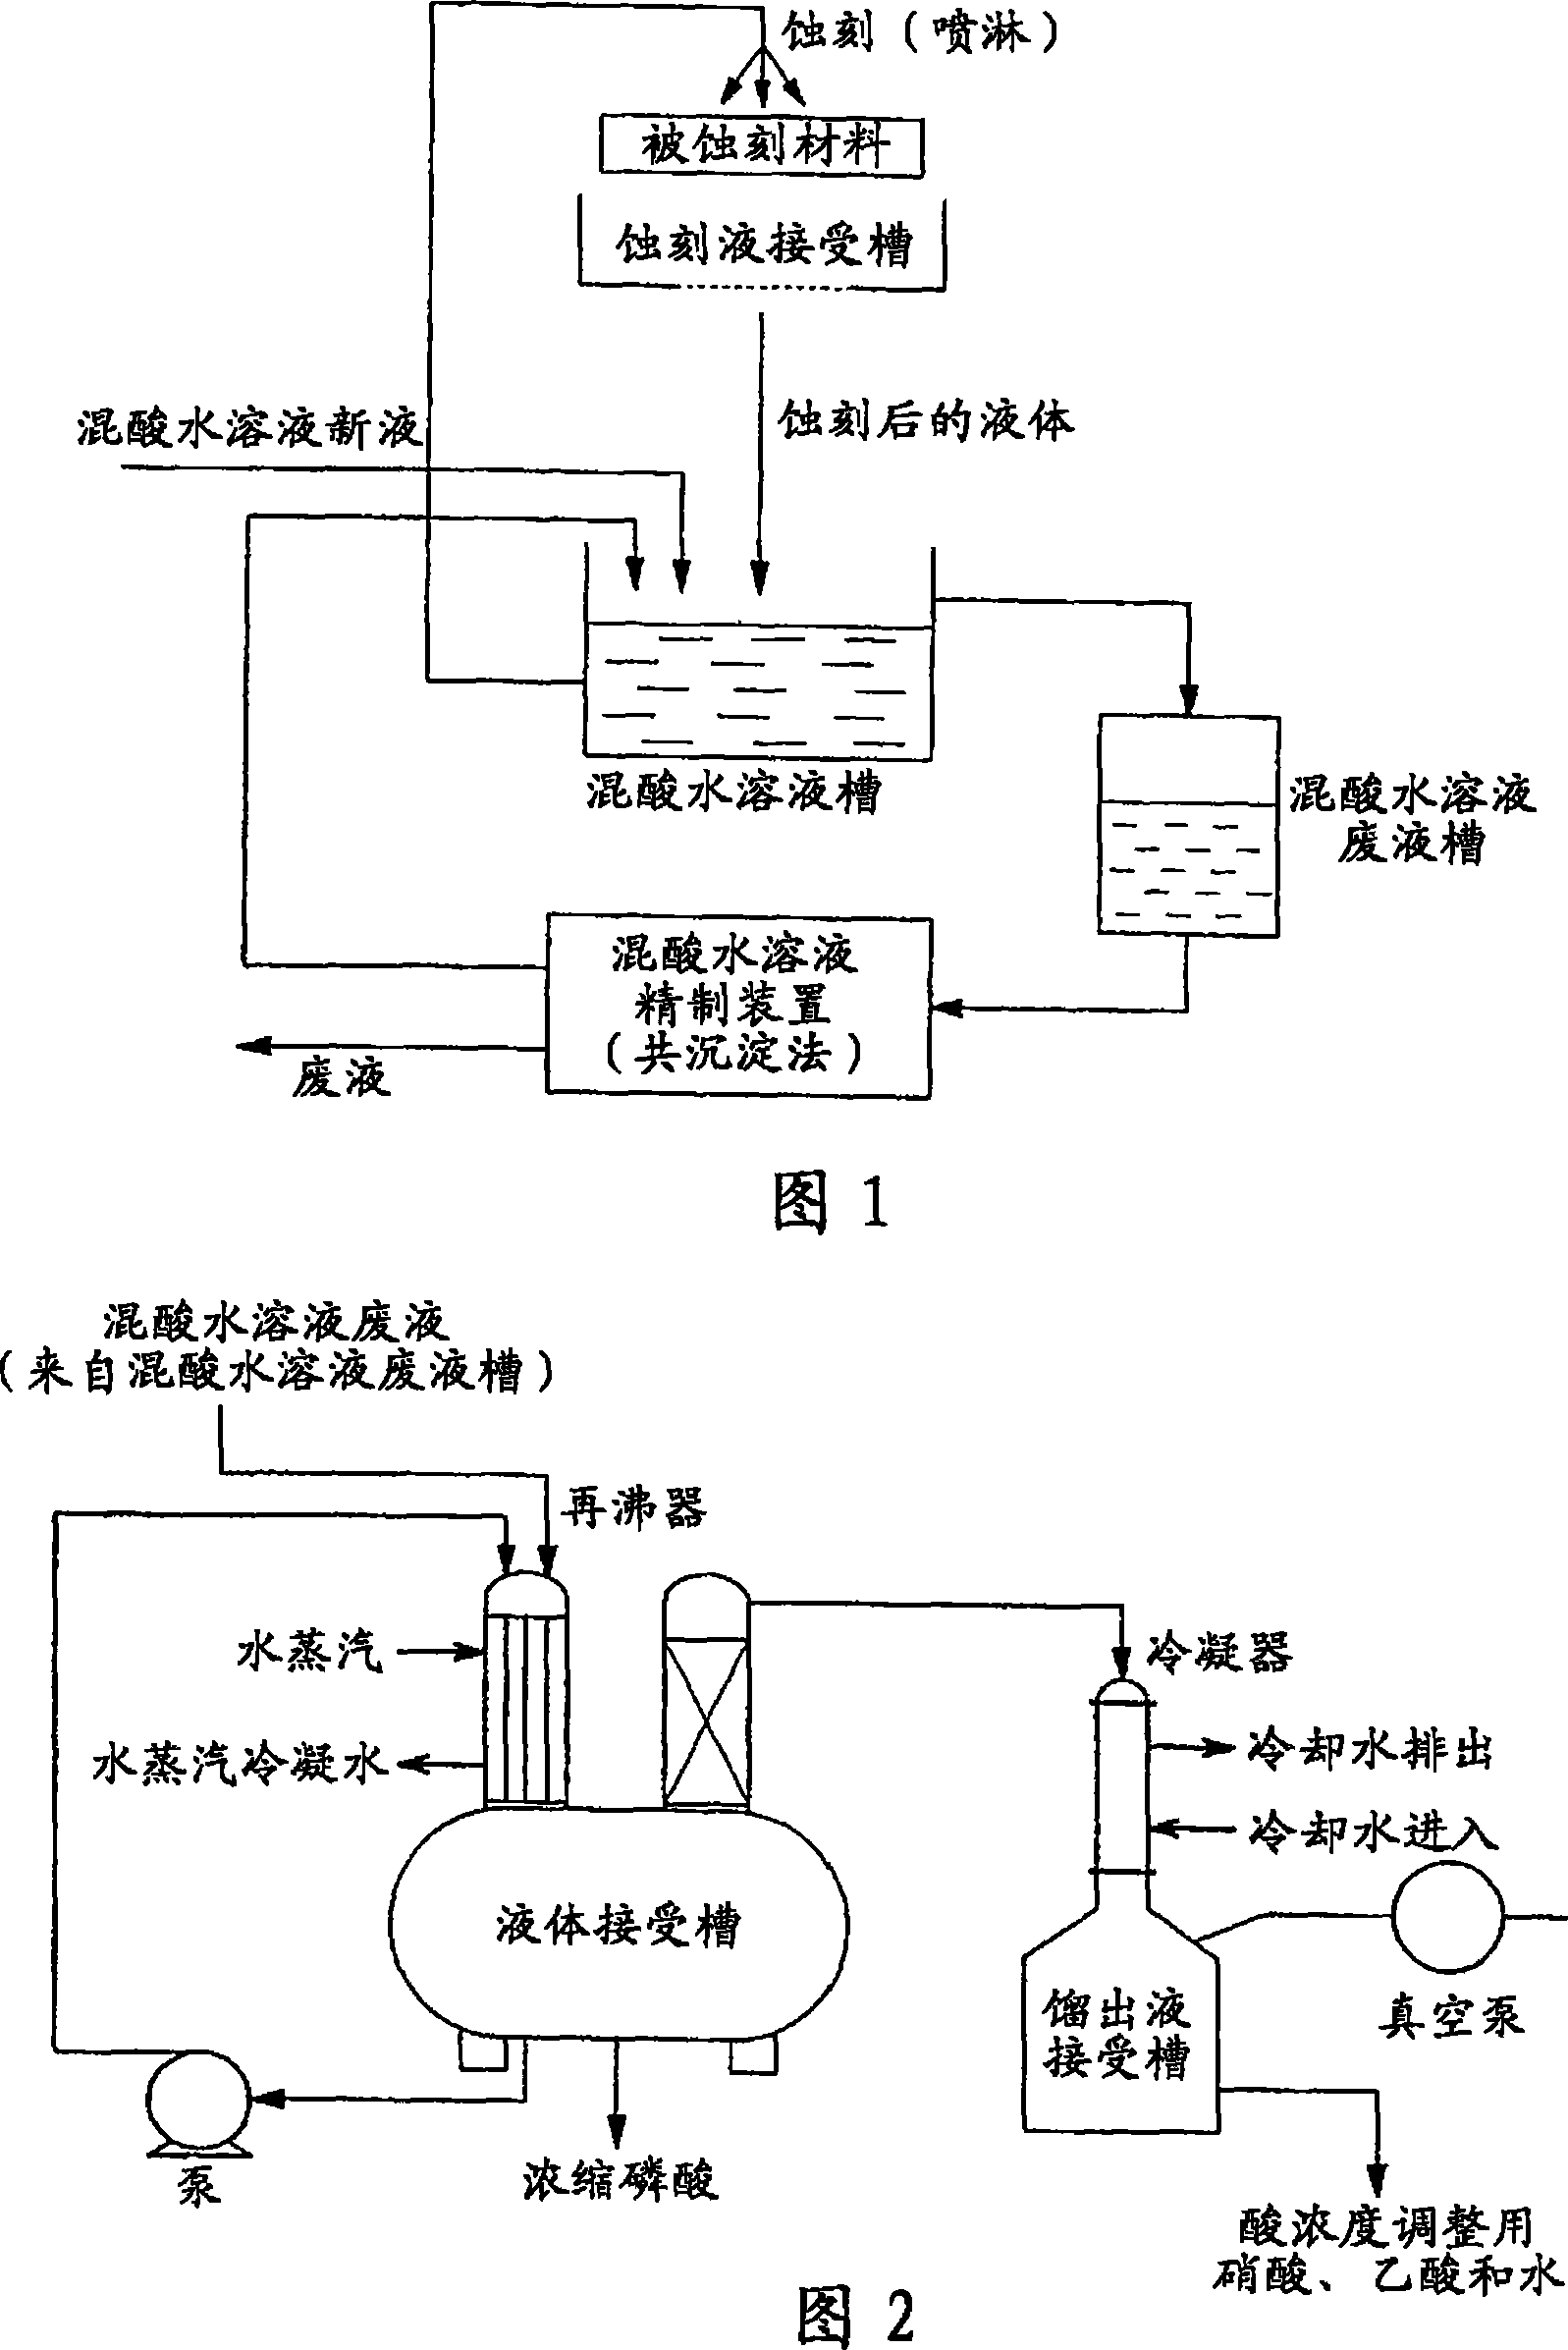 Method and apparatus for obtaining purified phosphoric acid from phosphoric acid aqueous solution containing plural metal ions